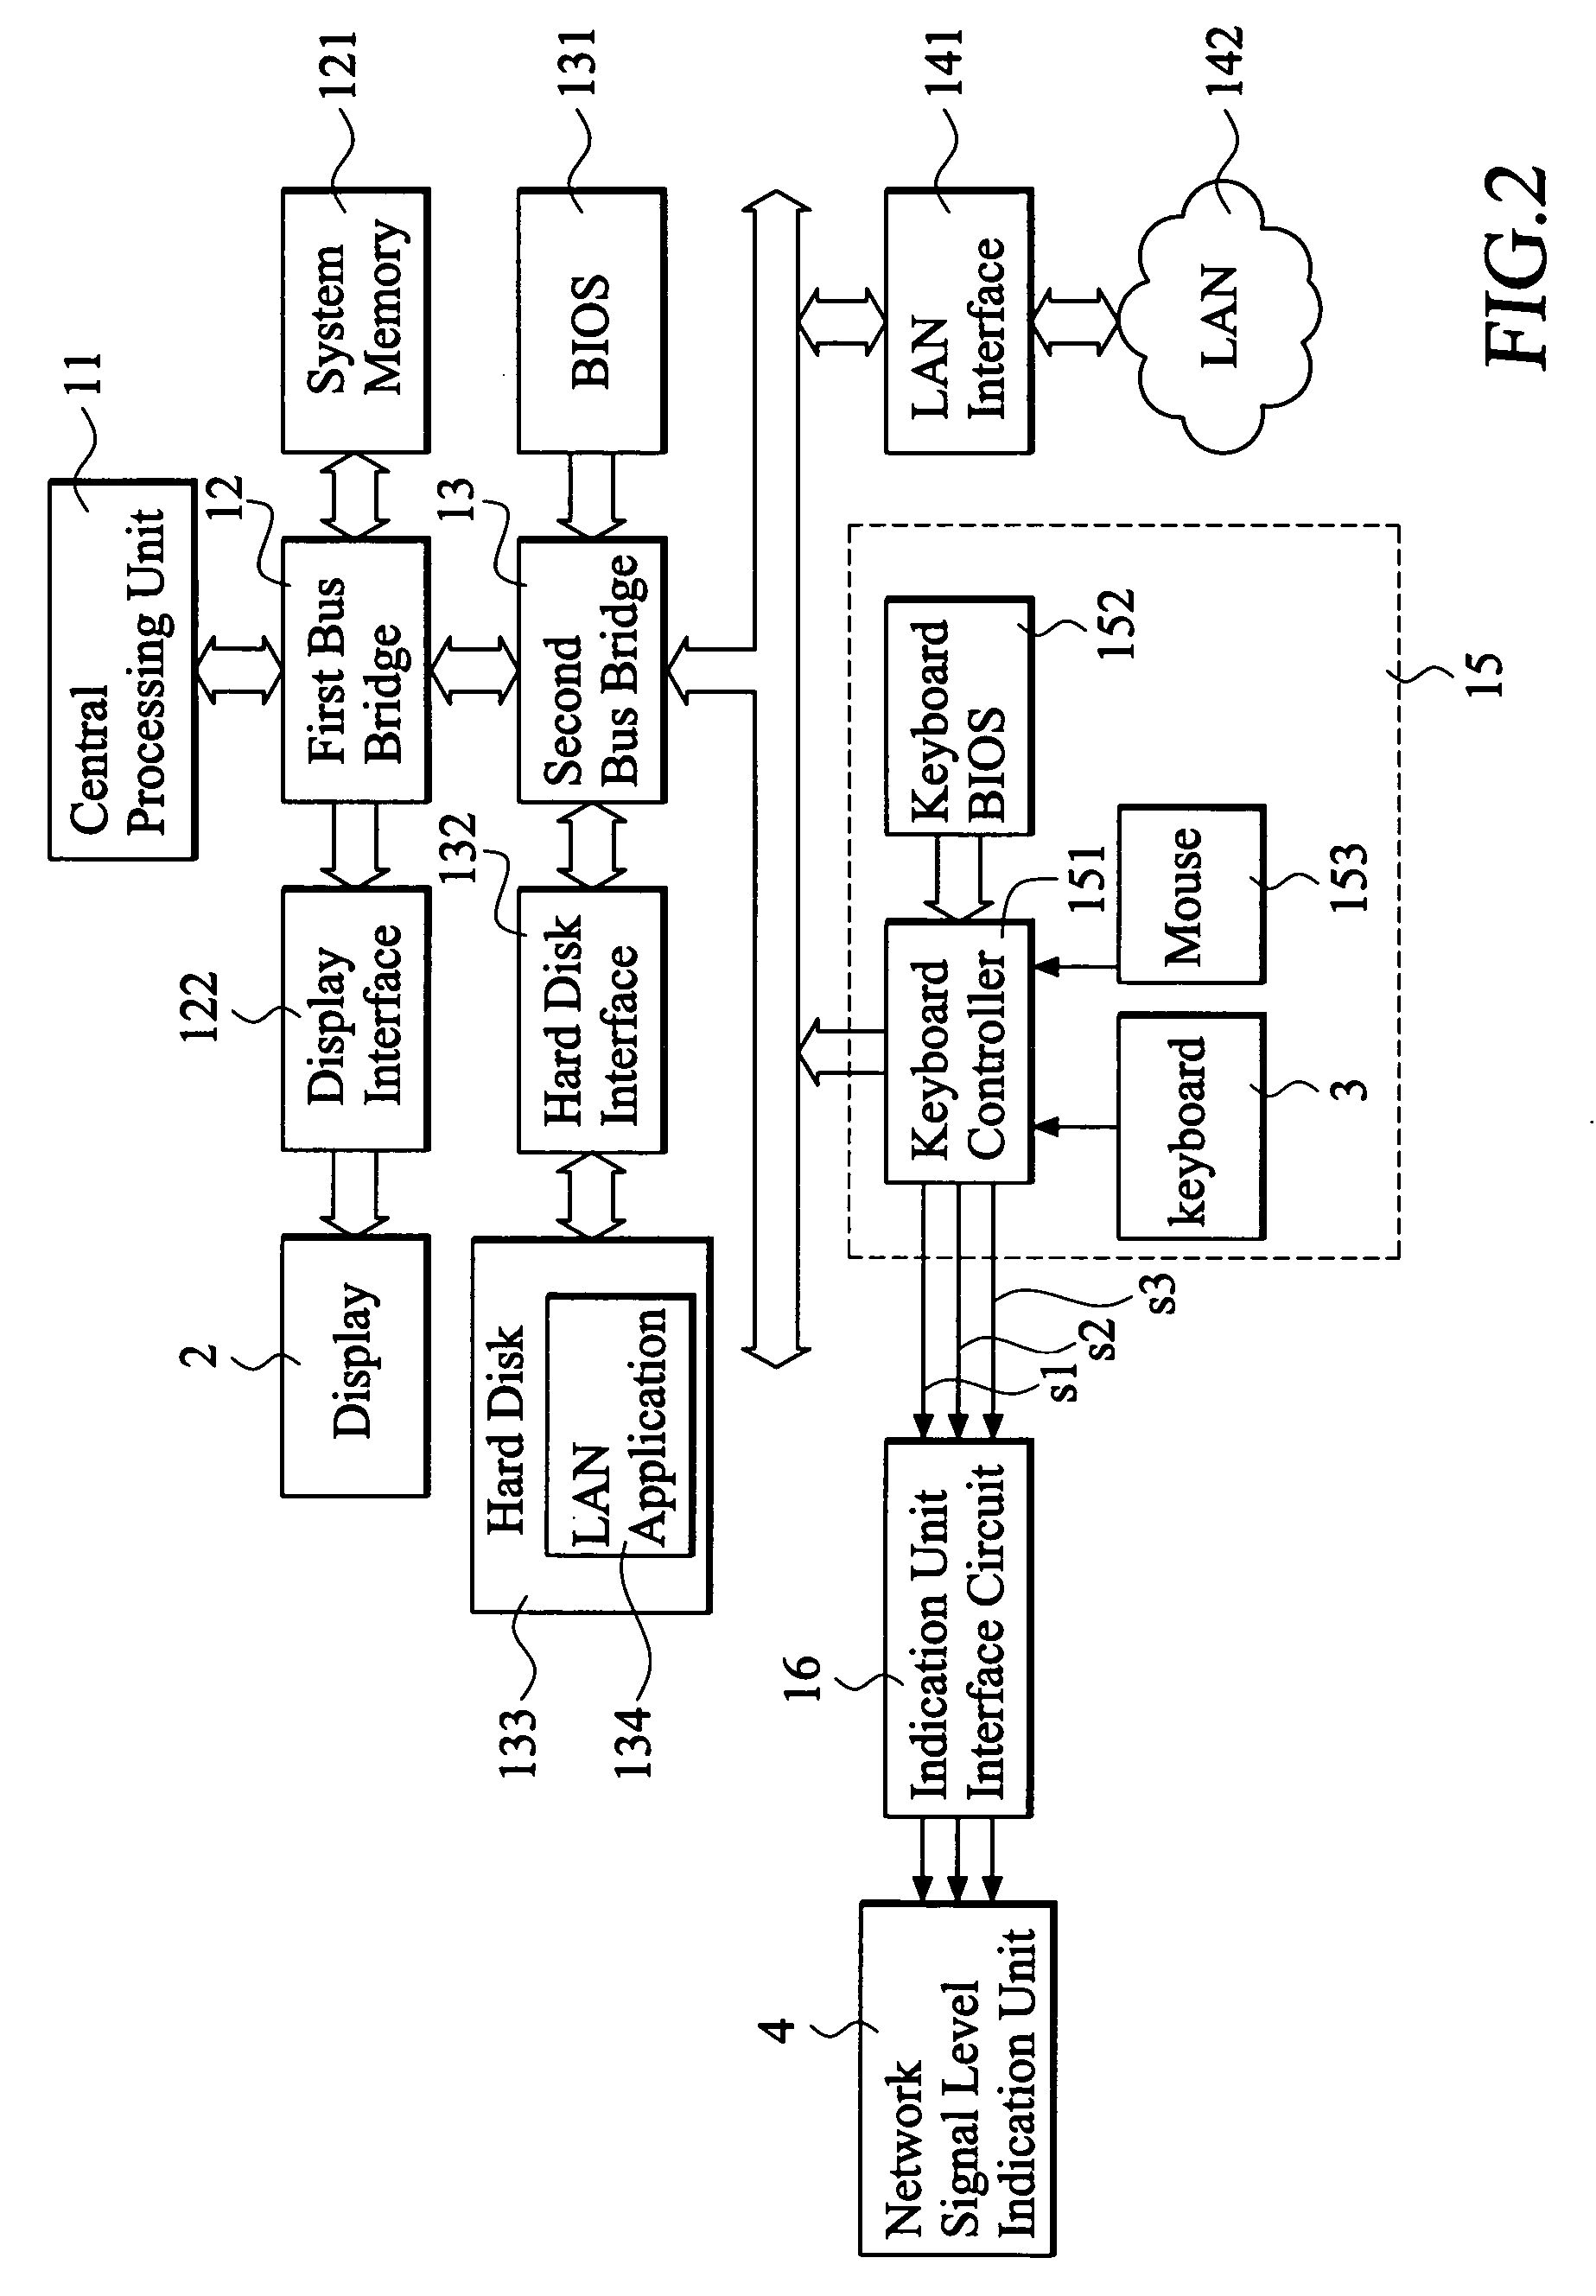 Computer system with network signal level indication device